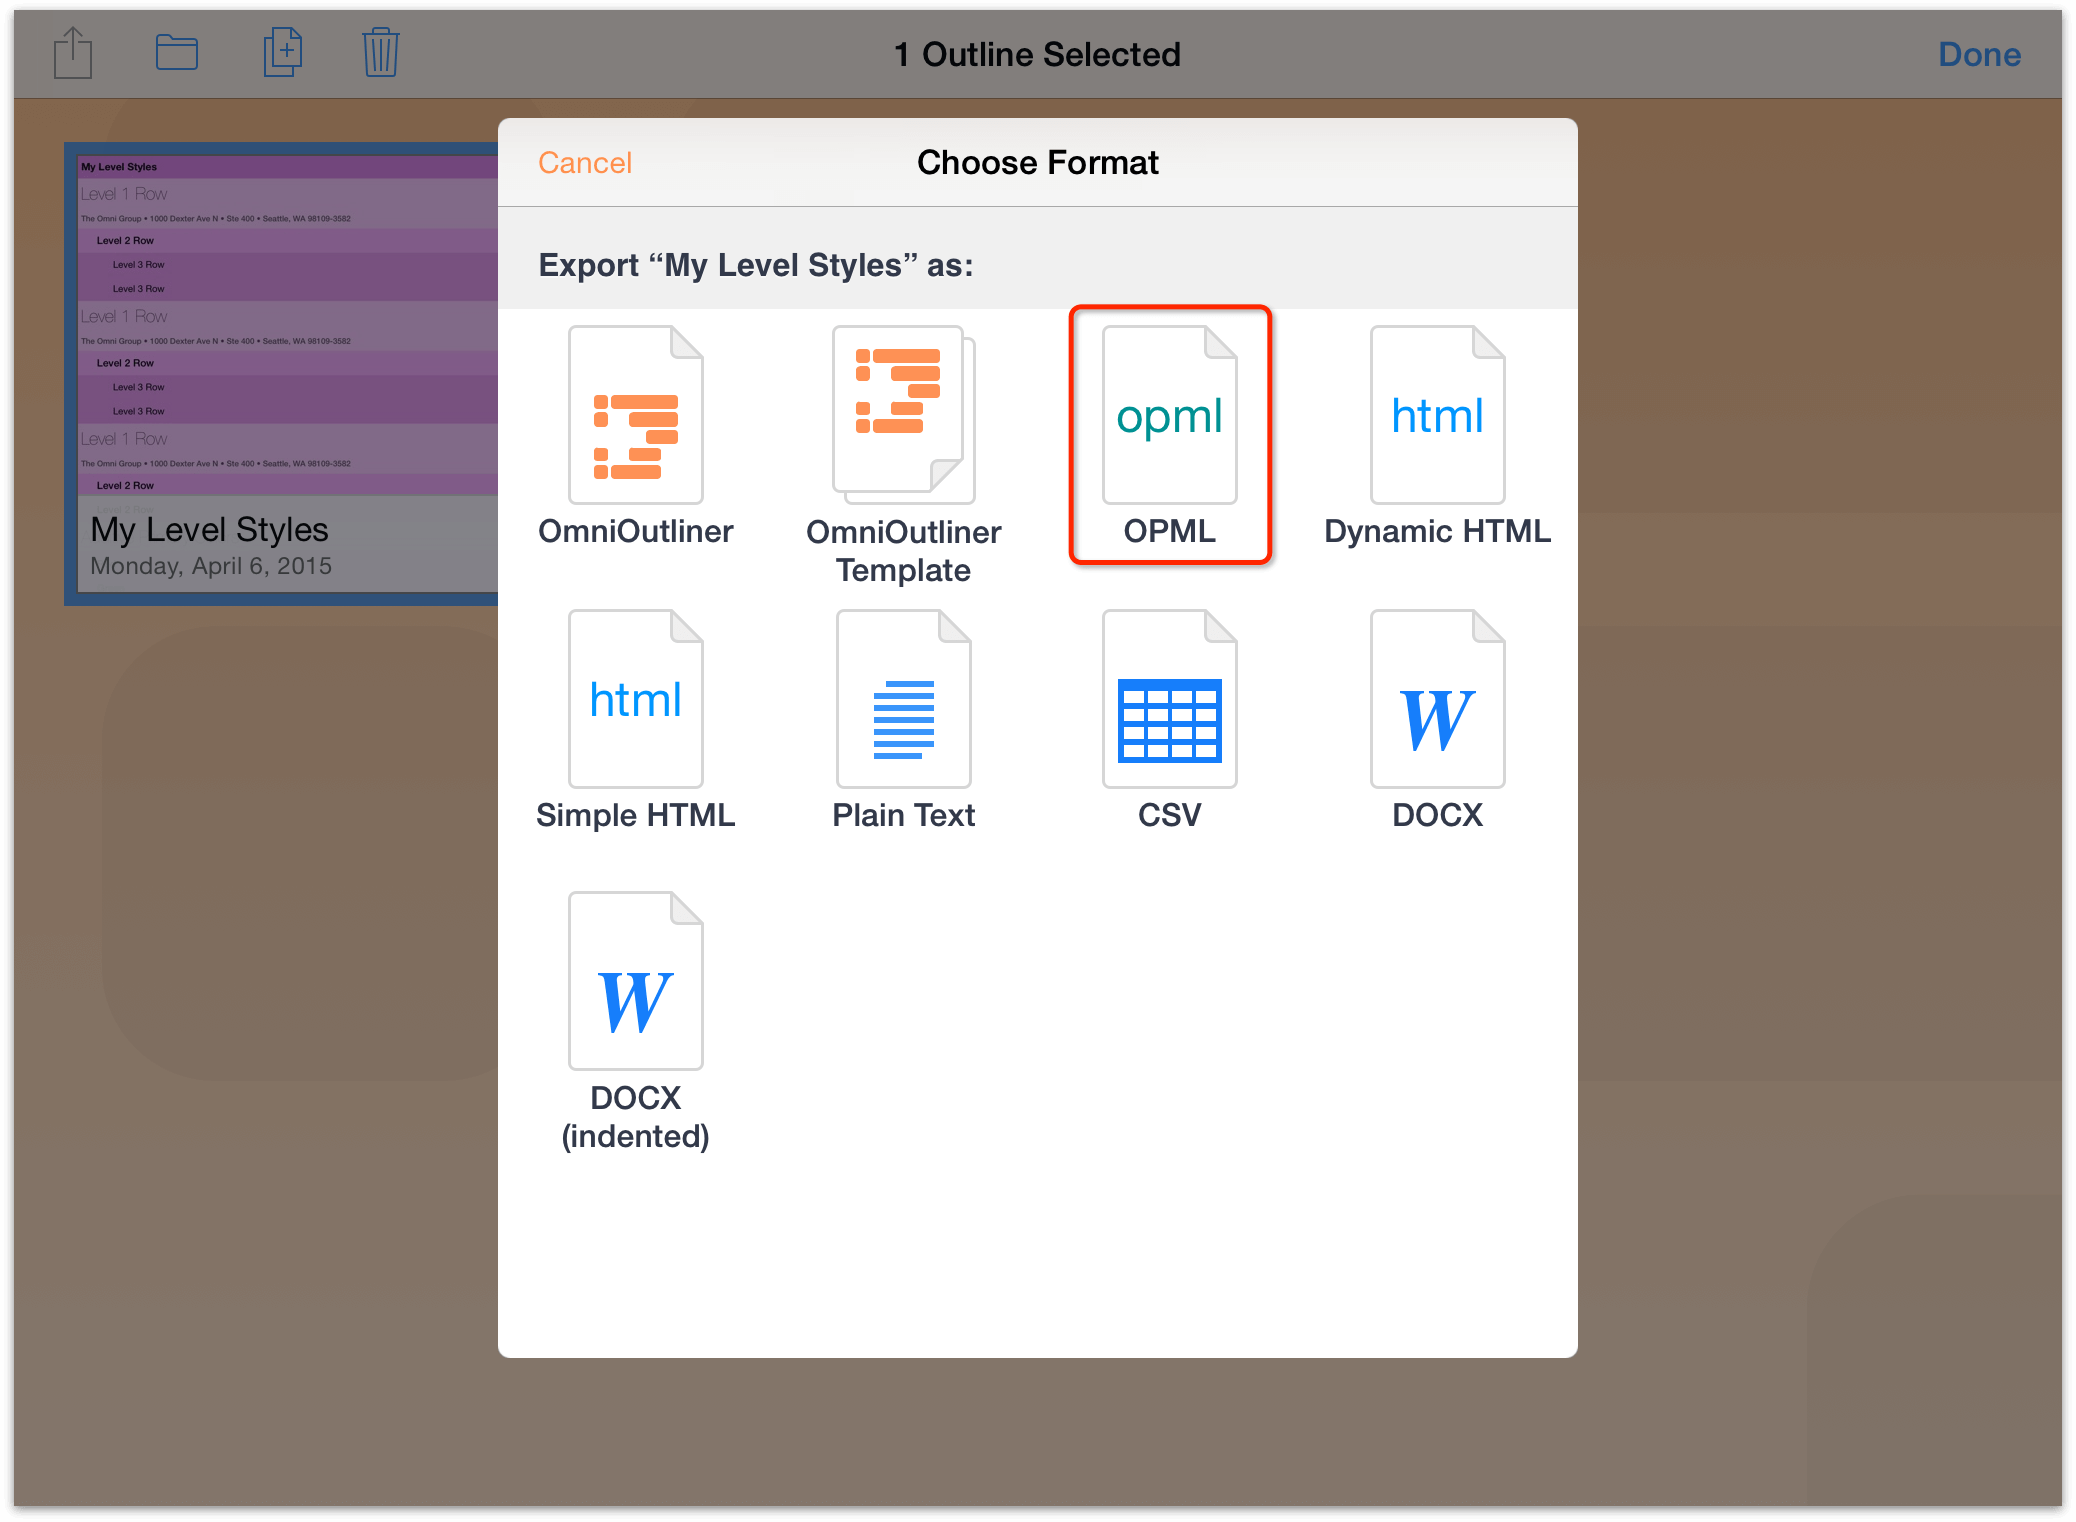 Tap the OPML file icon to export the outline as an OPML document